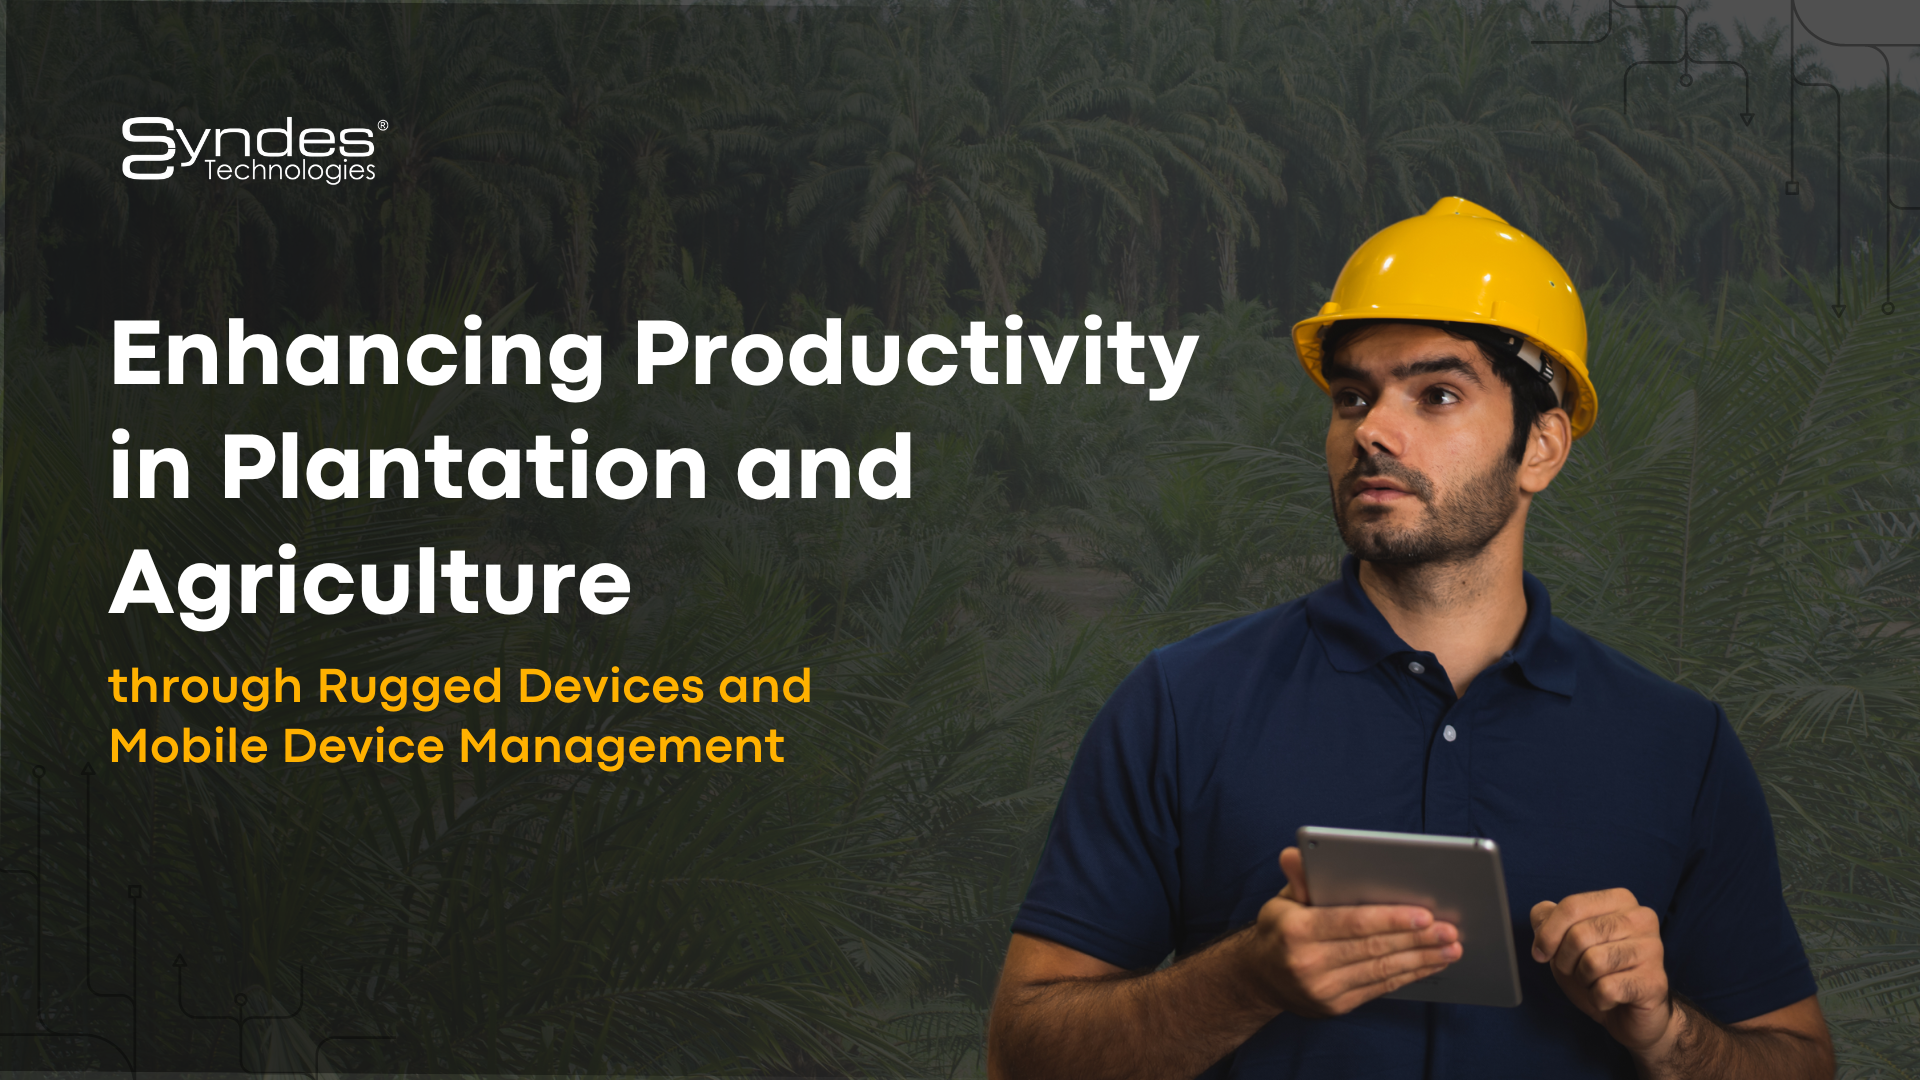 Enhancing Productivity in Plantation and Agriculture through Rugged Devices and Mobile Device Management